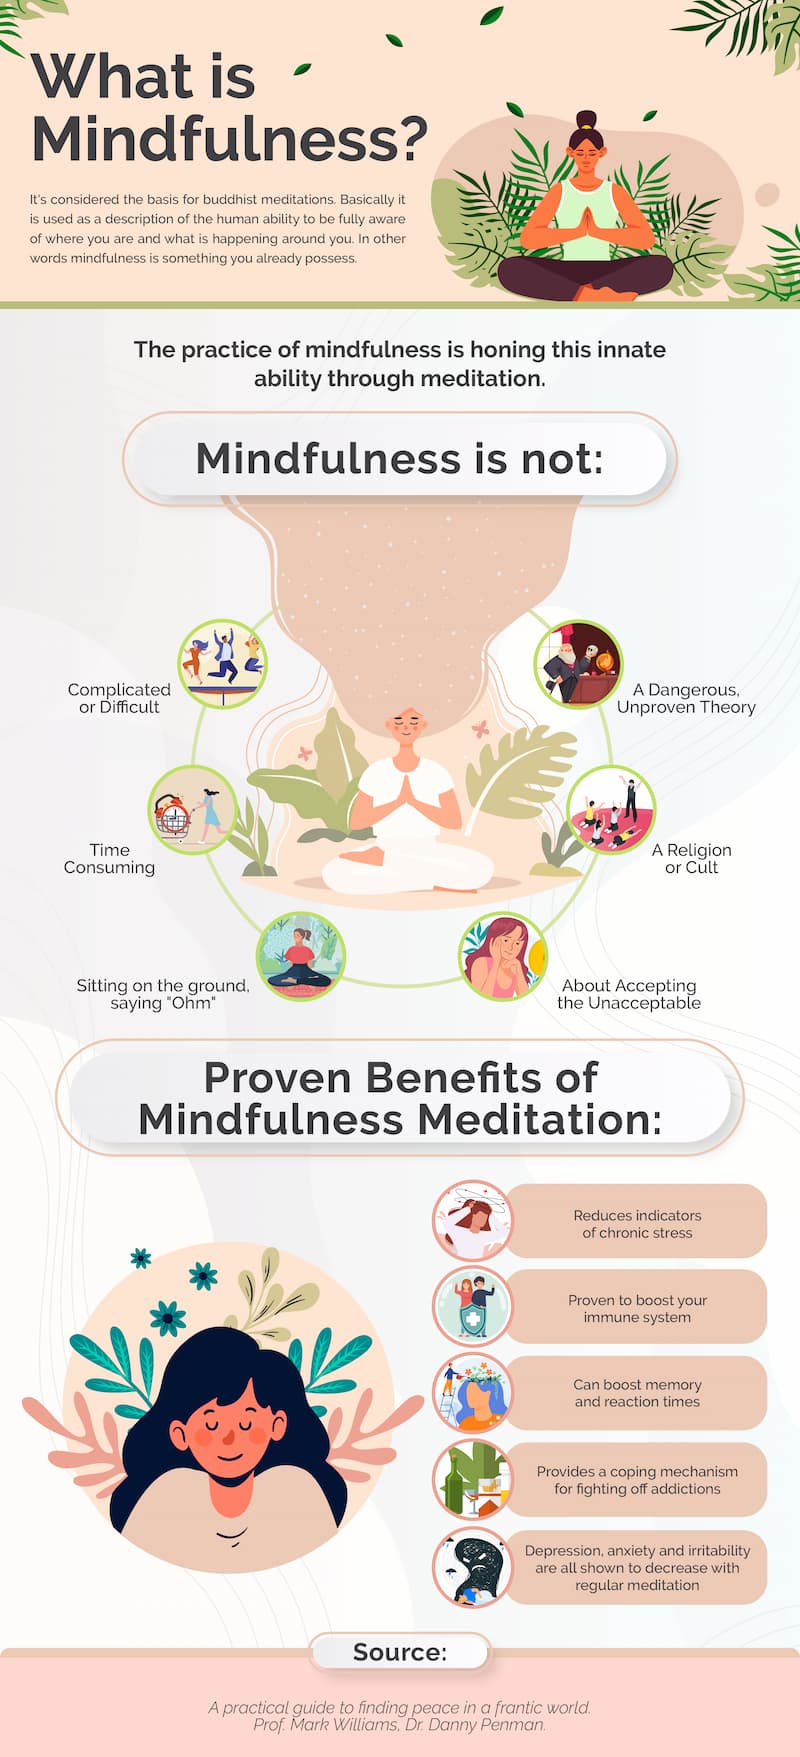 How does mindfulness meditation work and what are its benefits?